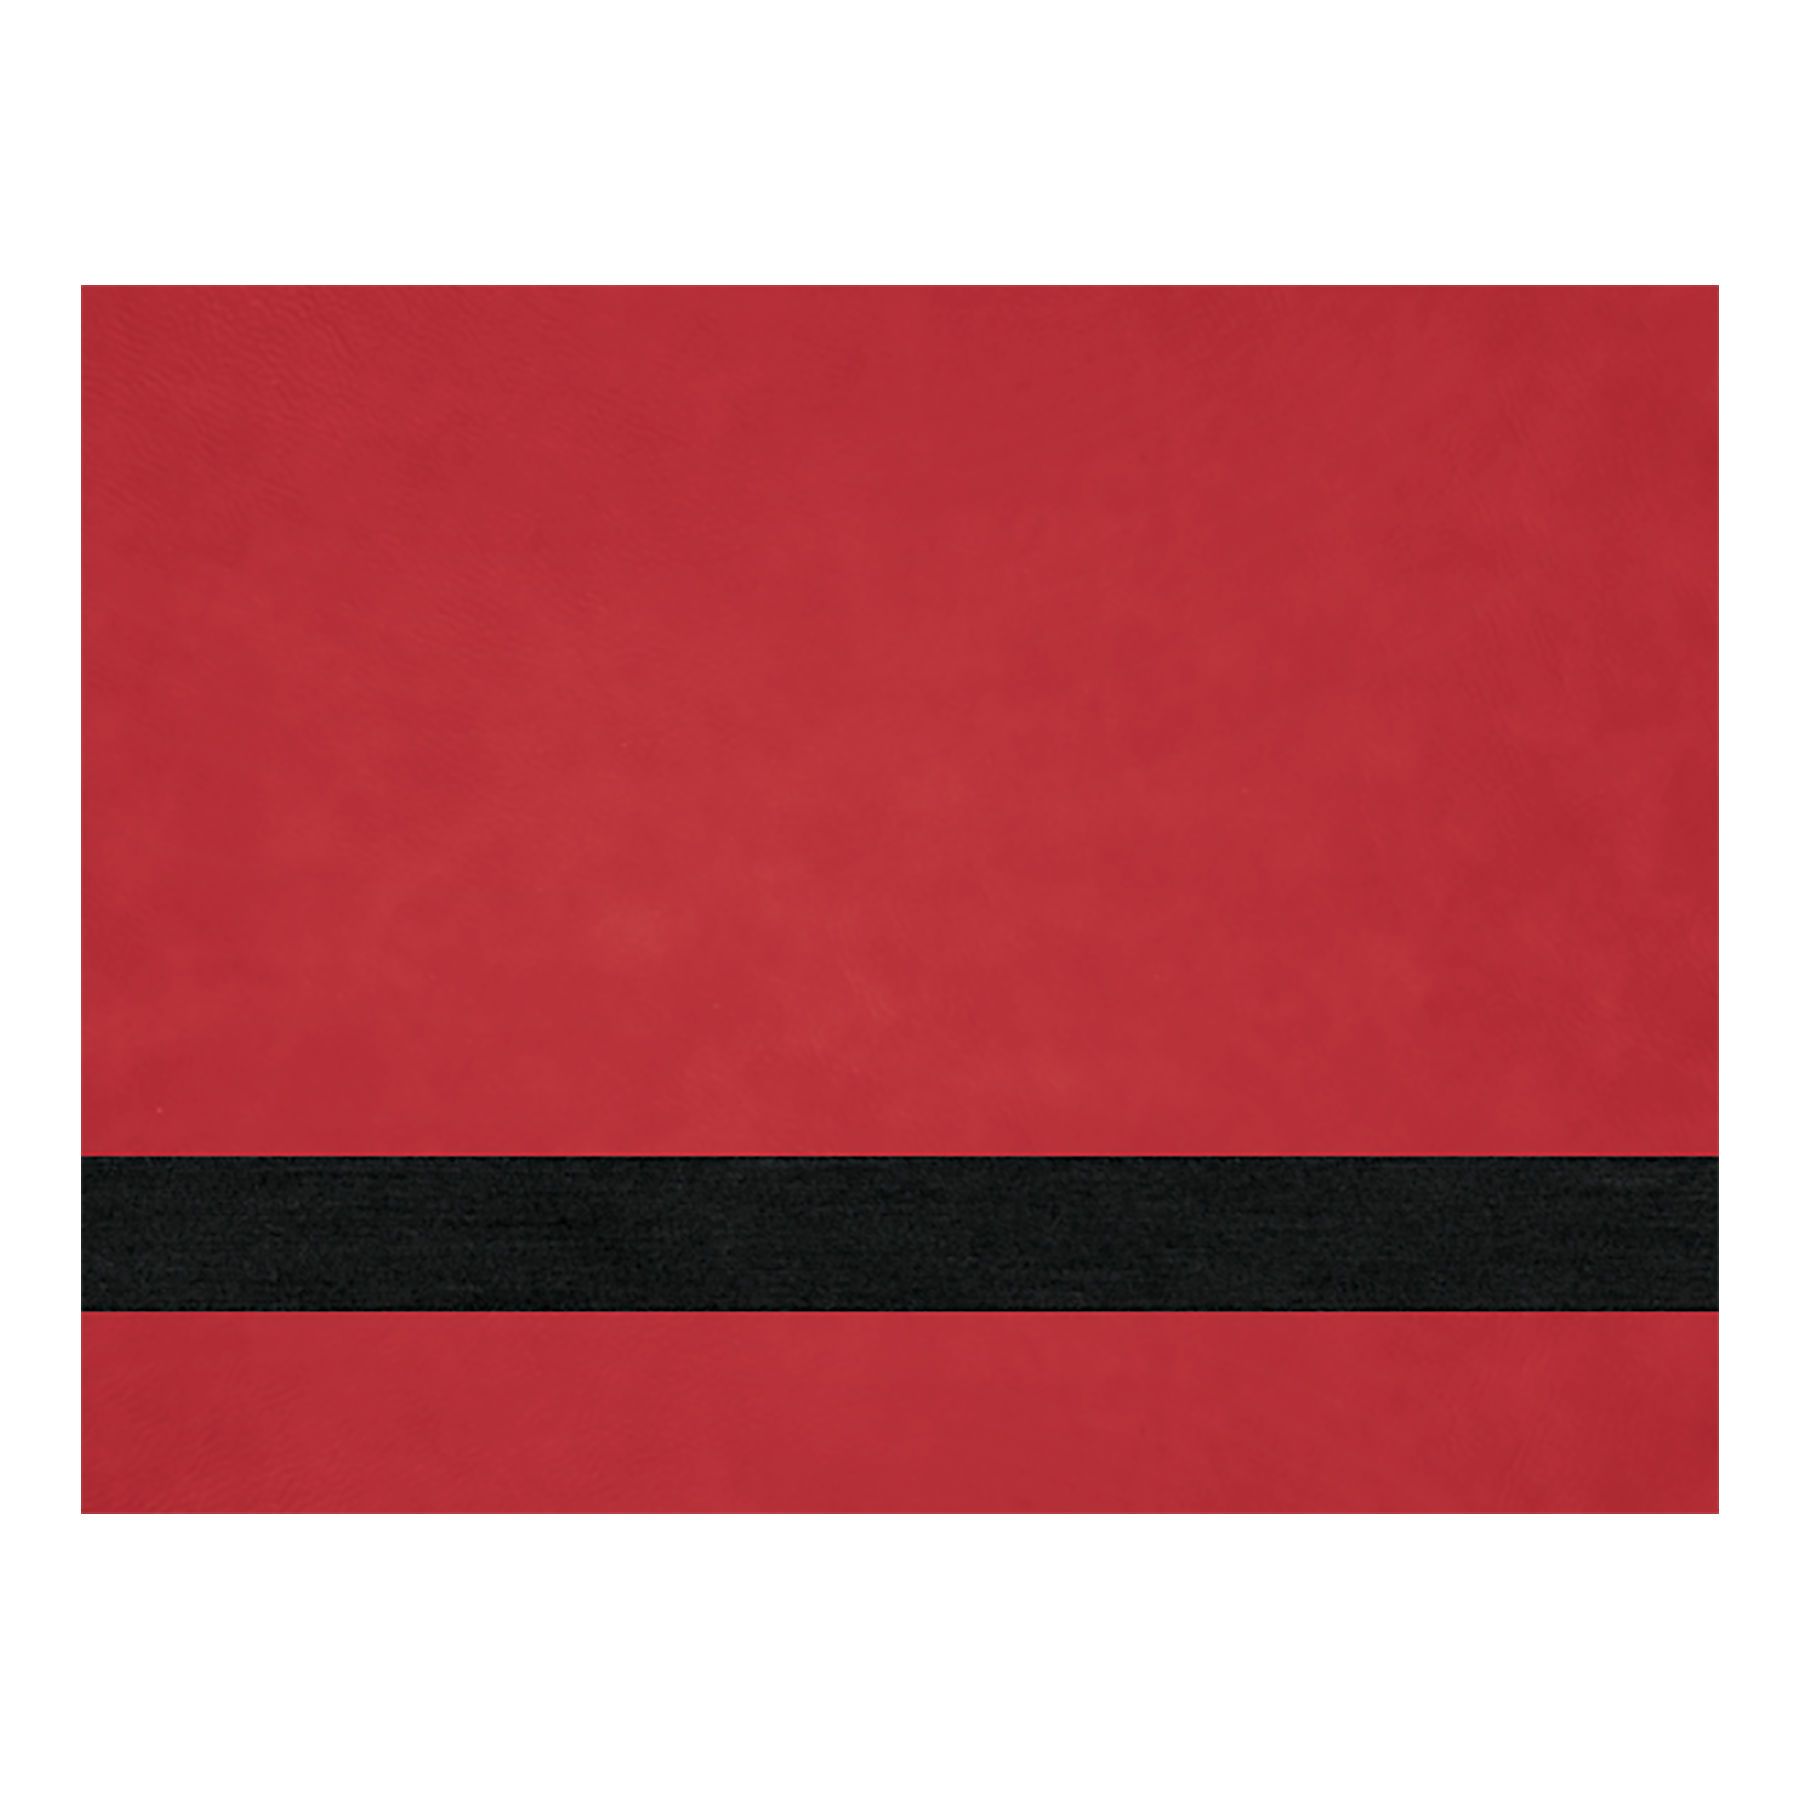 PRE-ORDER! Full Size Laserable Leatherette Sheet Stock, Rayjet Laser Engravers (Available Jan. 2022) Engraving Supplies Craftworks NW R400 (40" x 24") Red/Black 